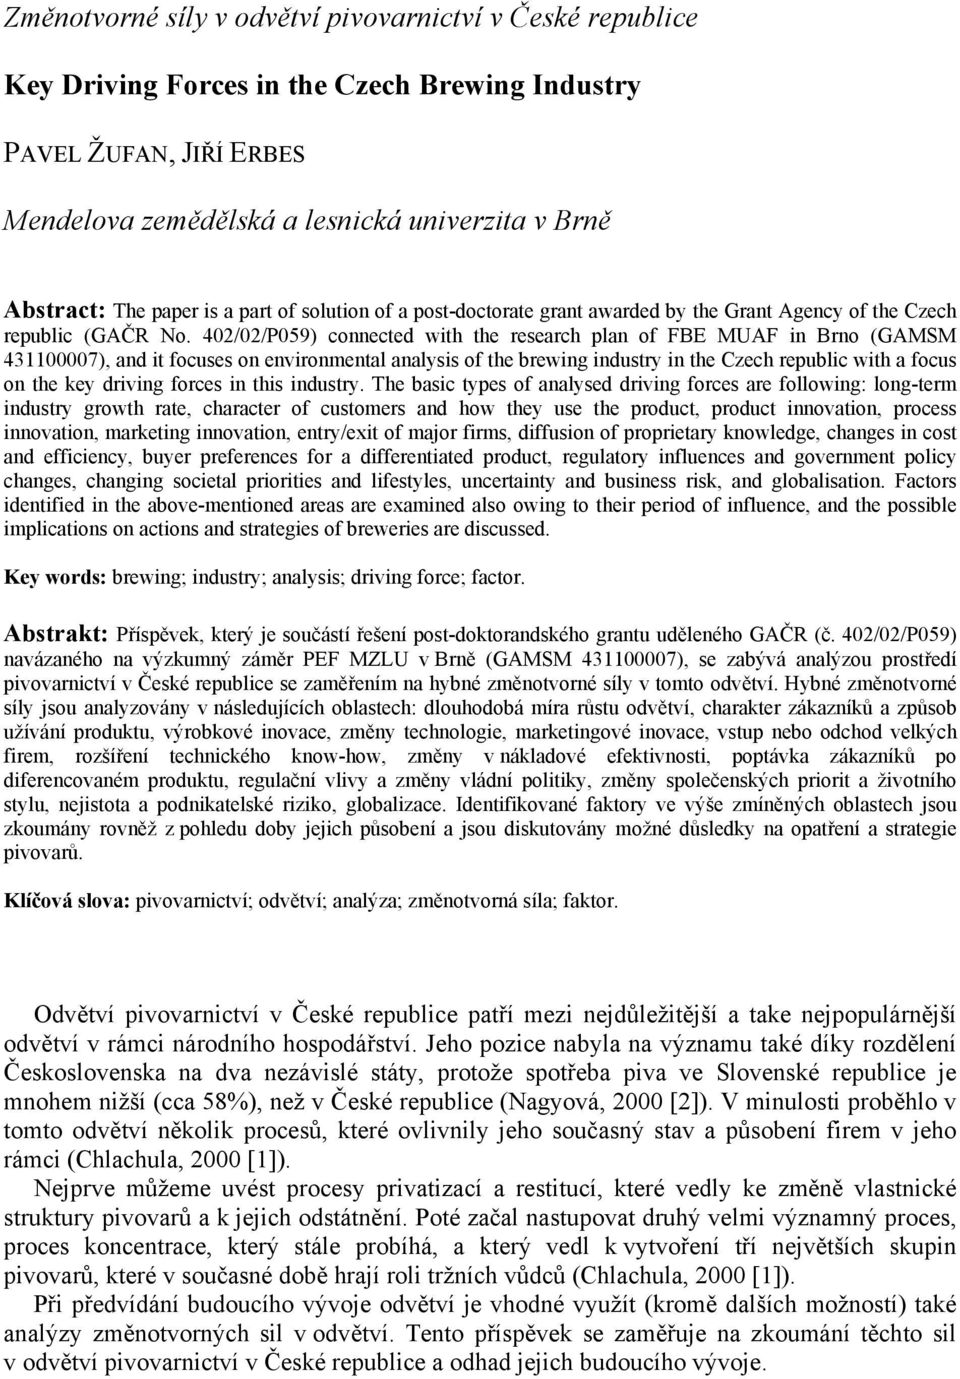 402/02/P059) connected with the research plan of FBE MUAF in Brno (GAMSM 431100007), and it focuses on environmental analysis of the brewing industry in the Czech republic with a focus on the key